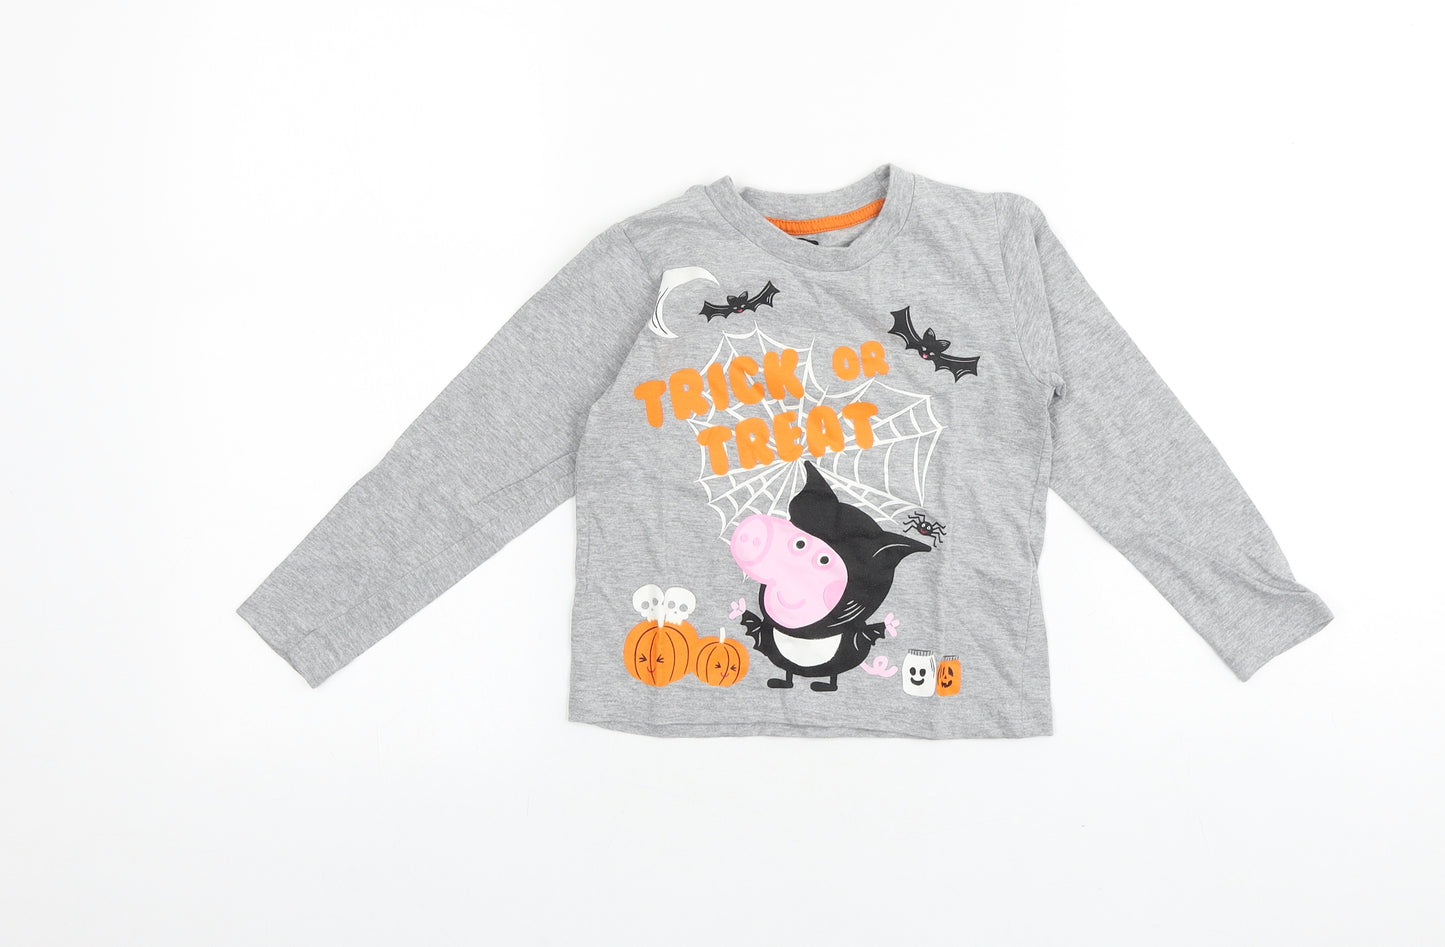 Peppa Pig Girls Grey 100% Cotton Basic T-Shirt Size 3-4 Years Round Neck Pullover - Trick or Treat